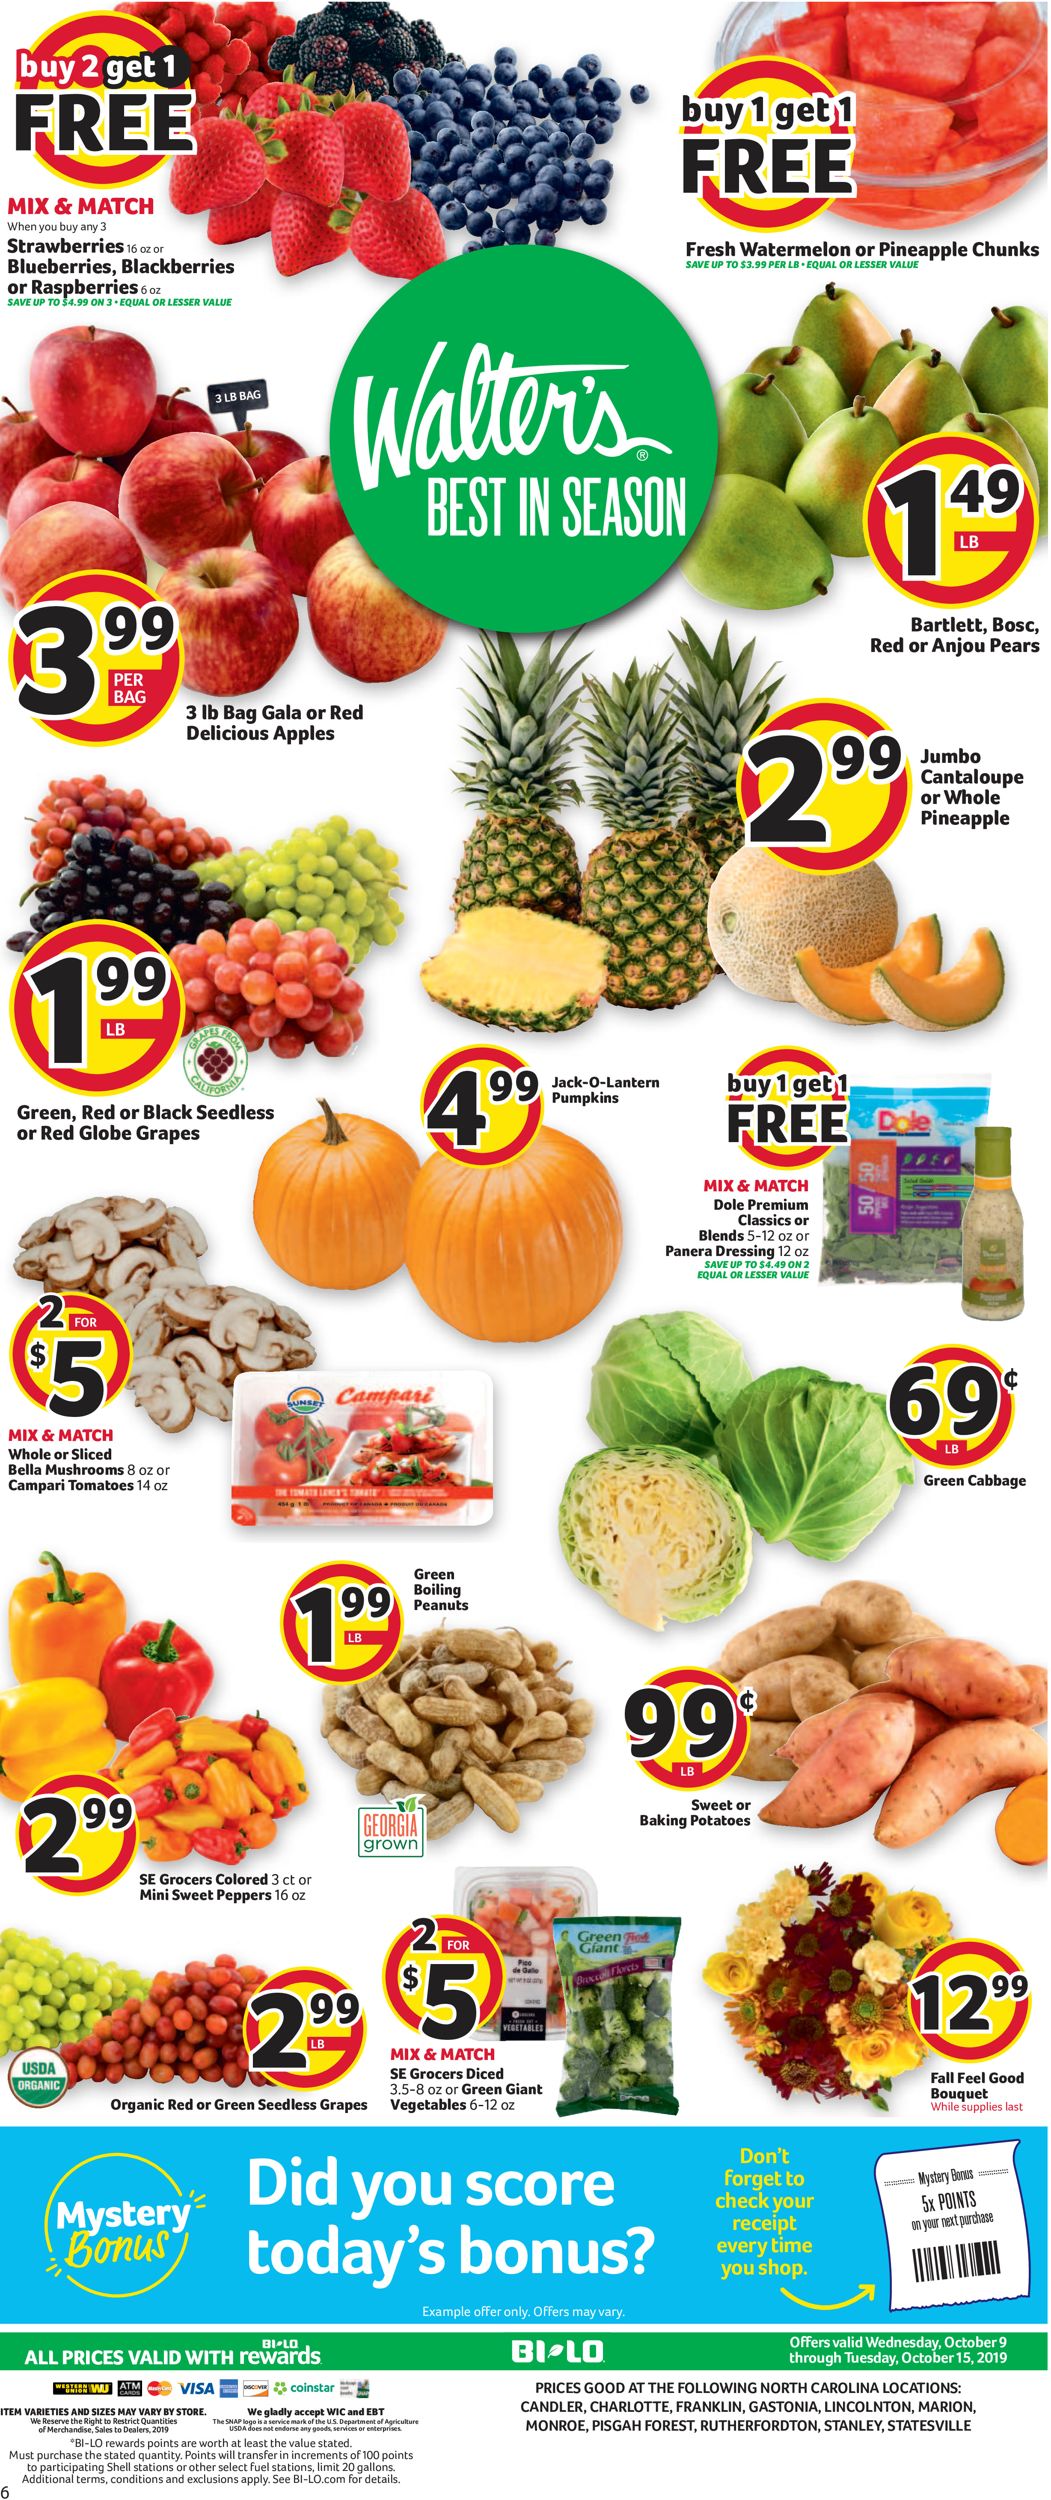 BI-LO Current weekly ad 10/09 - 10/15/2019 8 - frequent ...